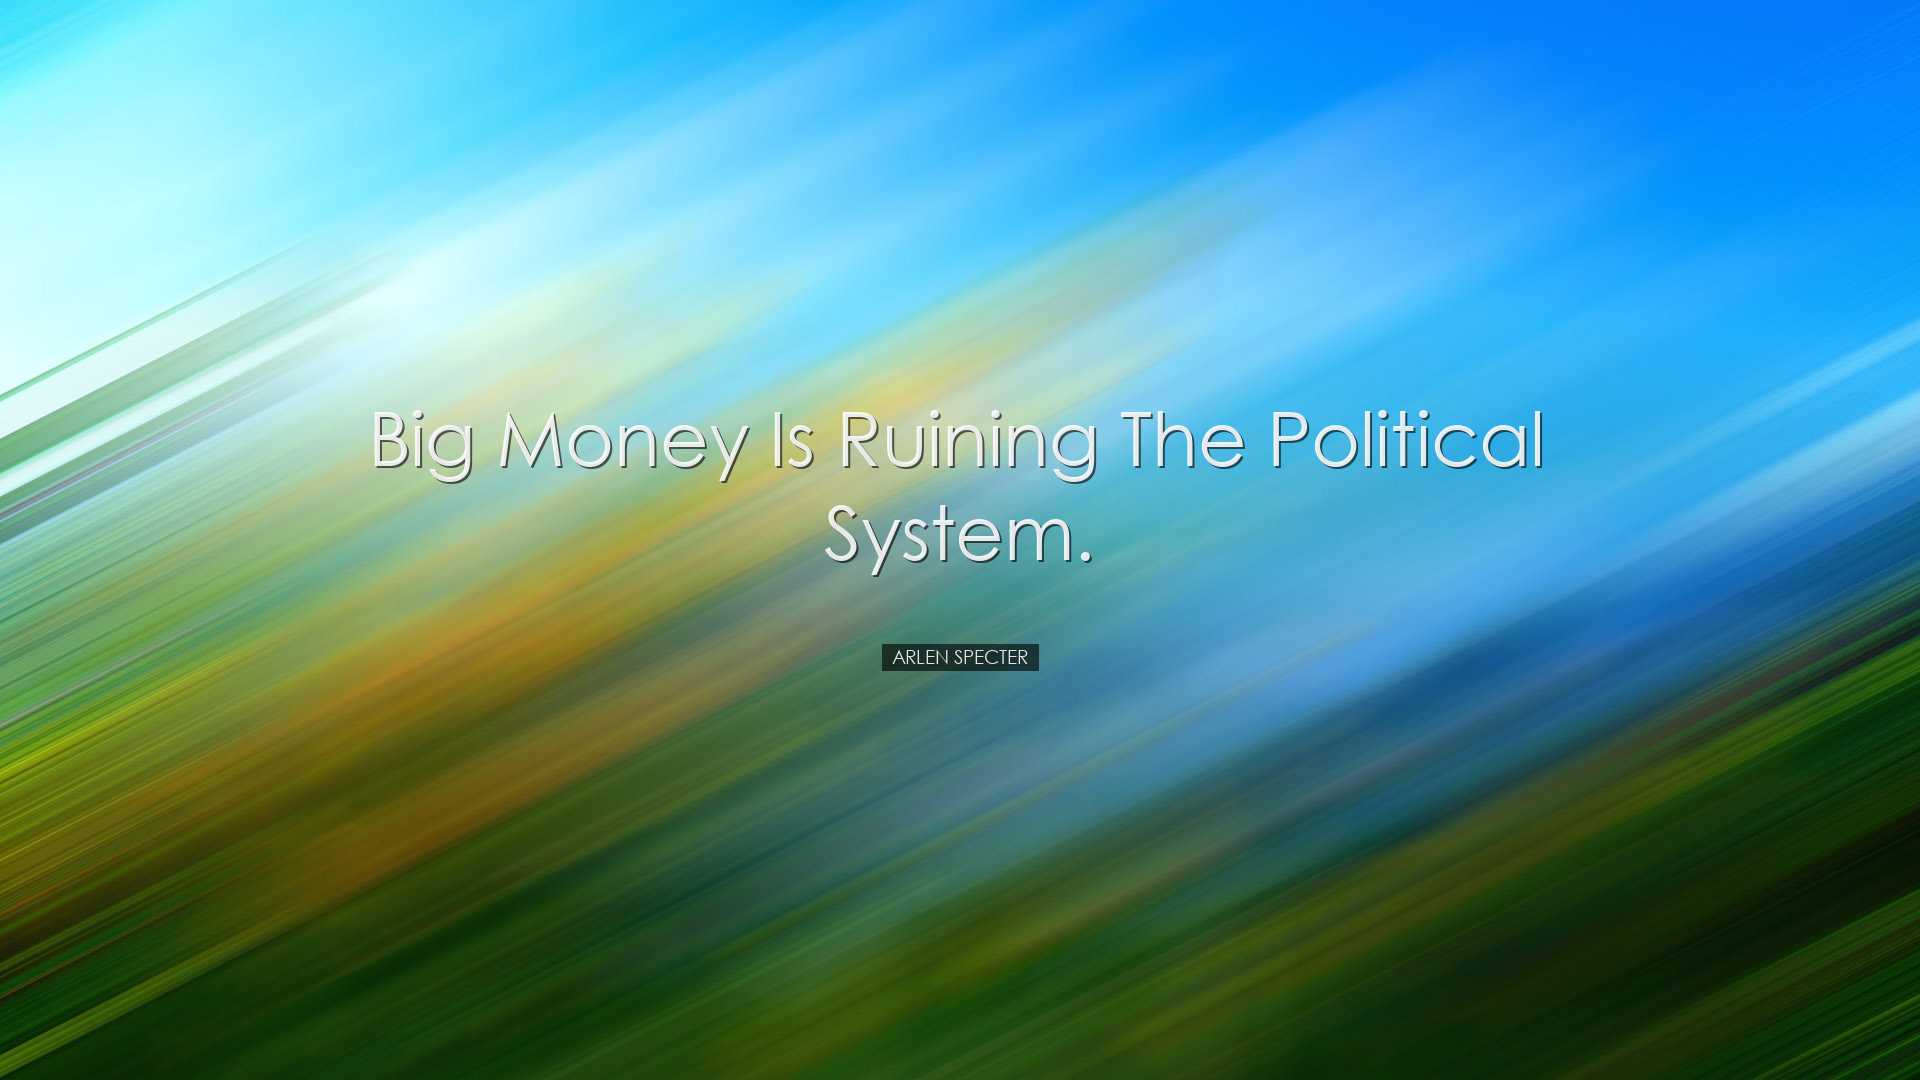 Big money is ruining the political system. - Arlen Specter